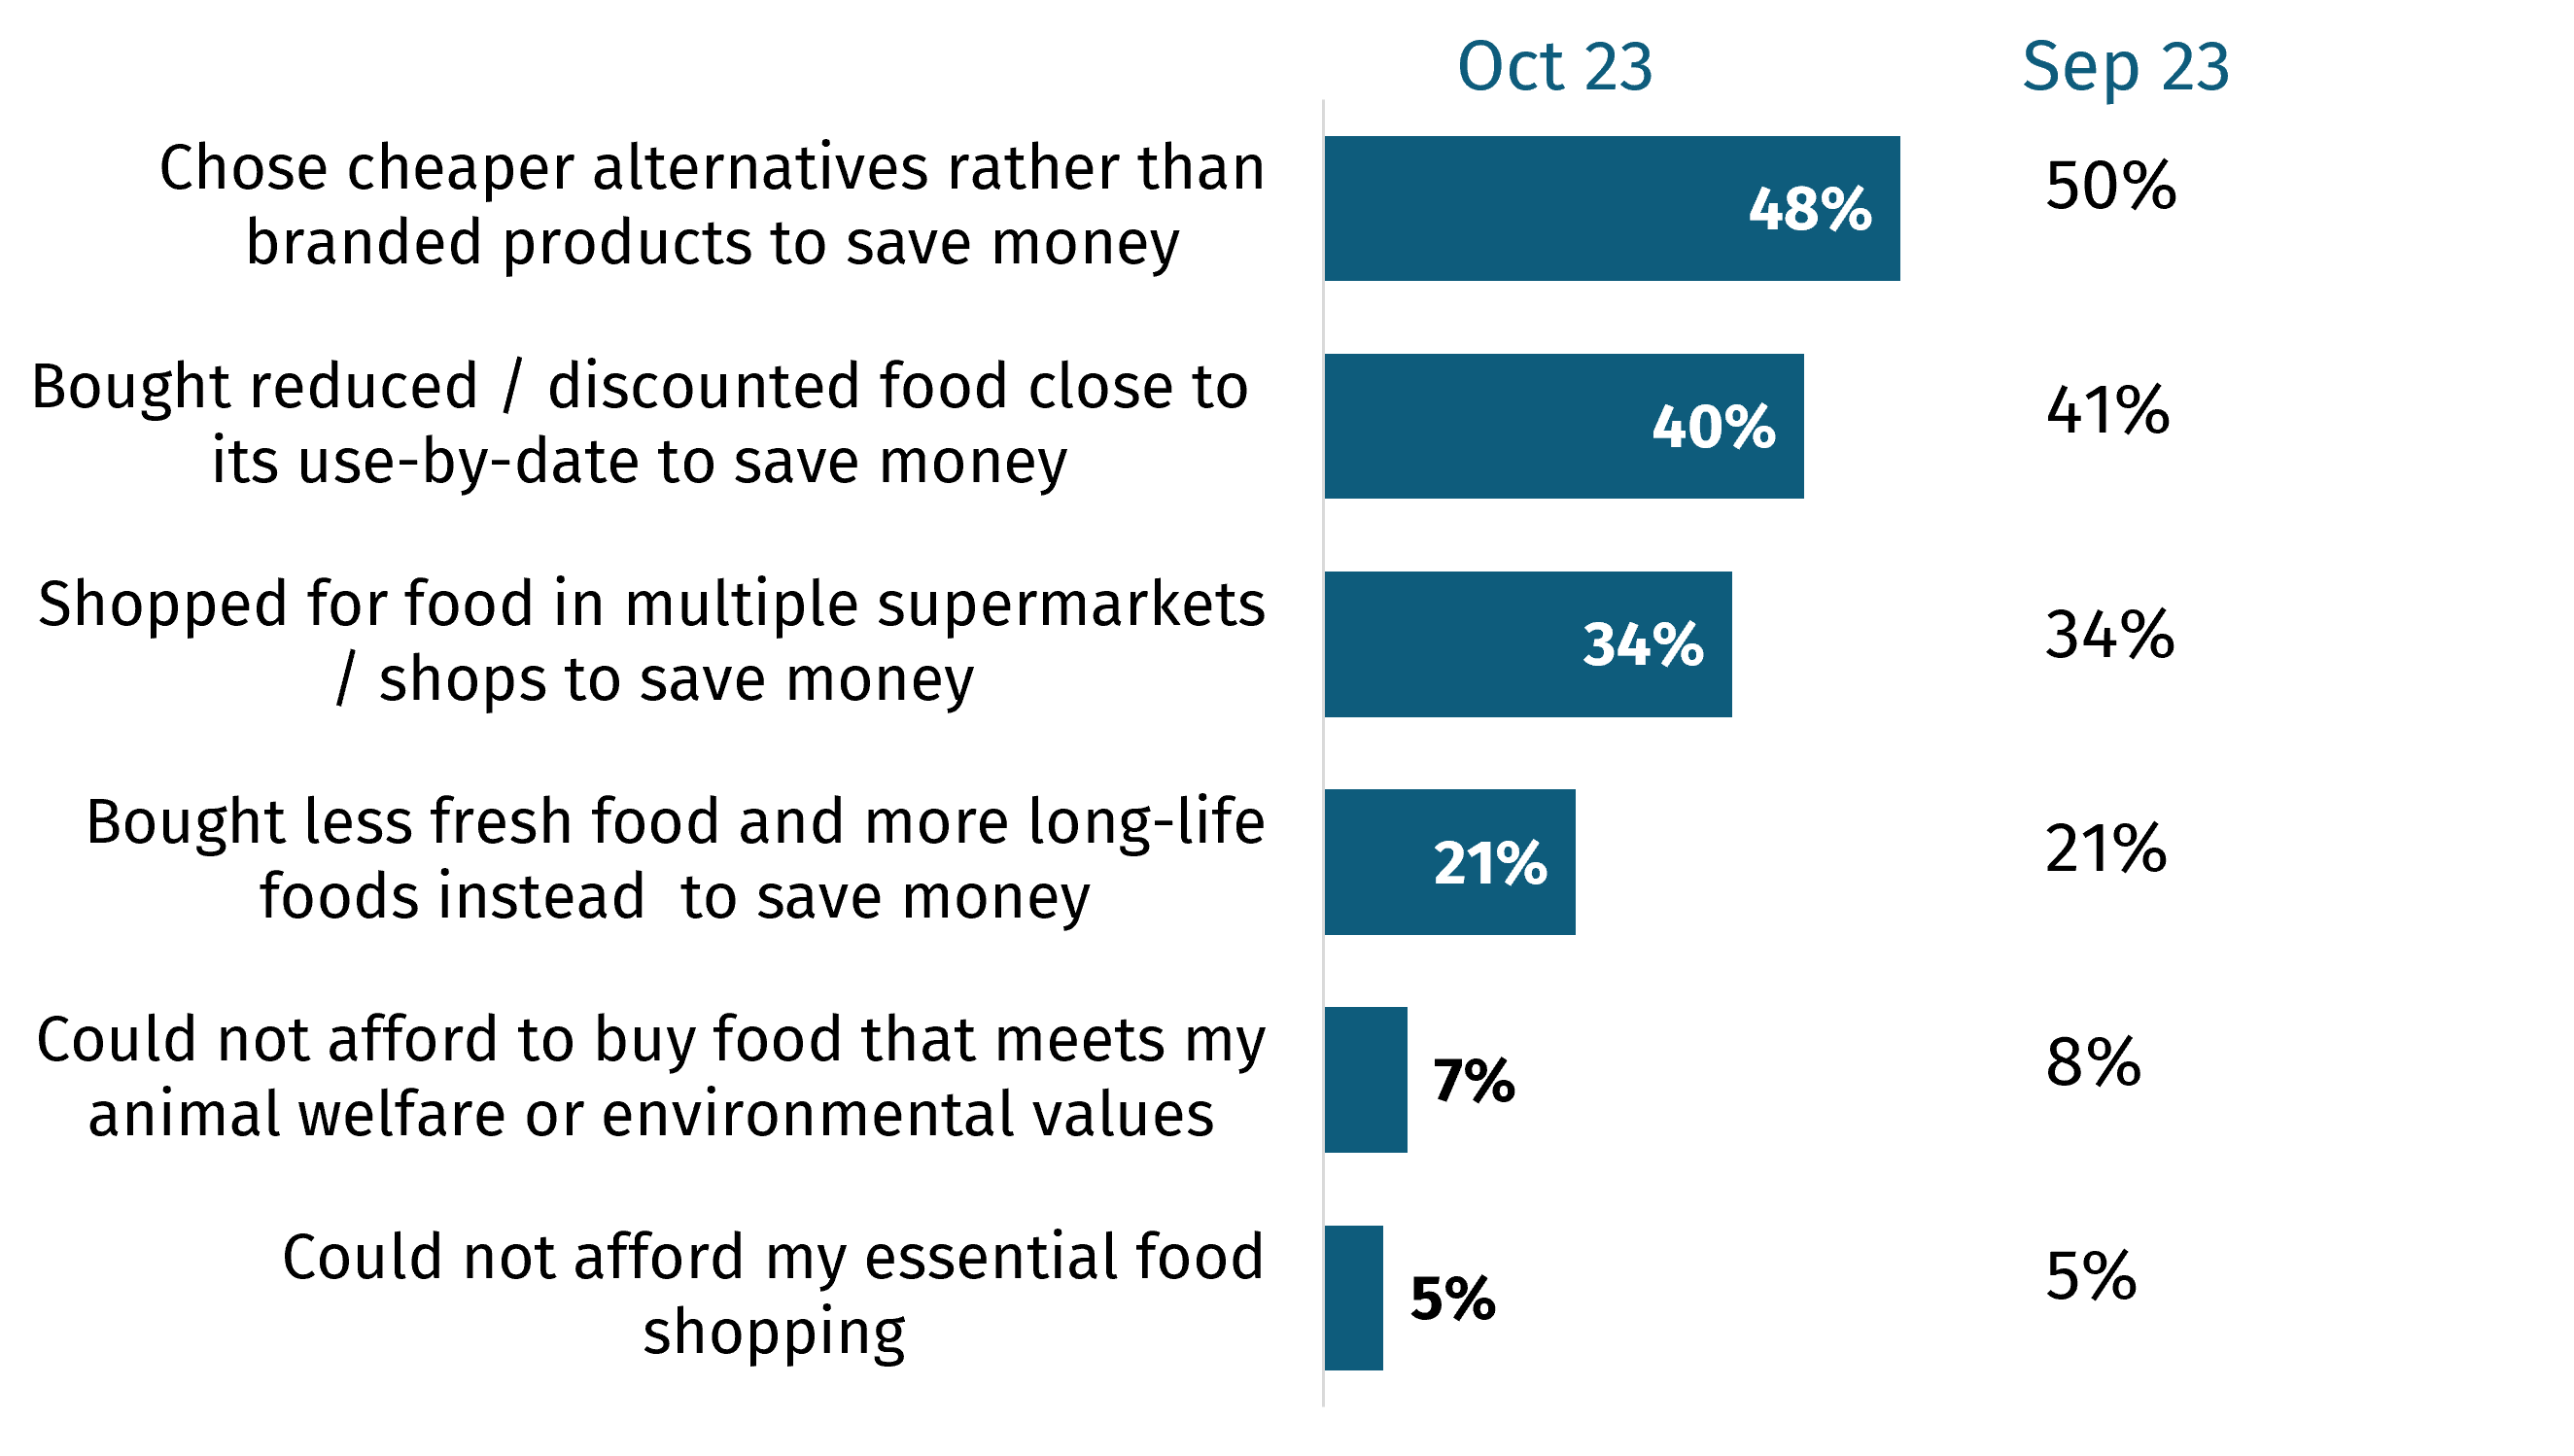 The chart shows reported shopping behaviours in October. 48% chose cheaper alternatives and 40% bought reduced or discounted food.